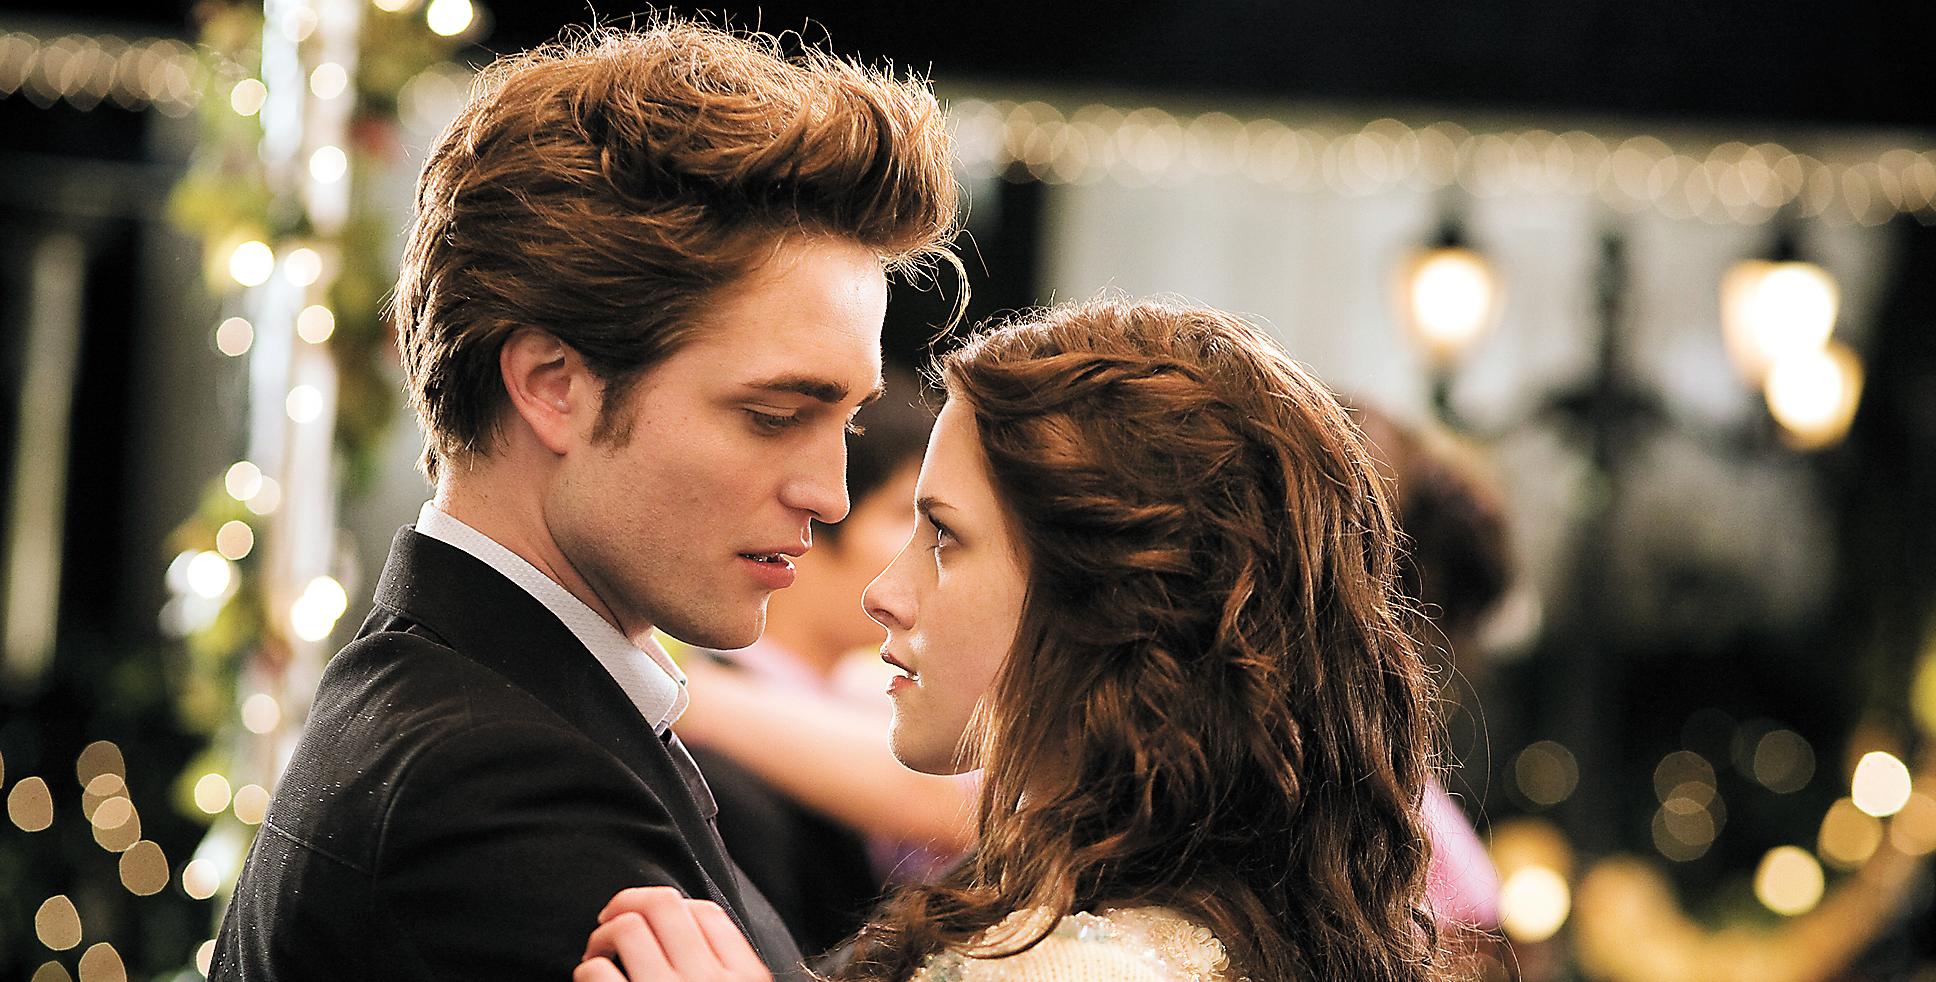 Twilight streaming guide how to watch Twilight online Digital Trends